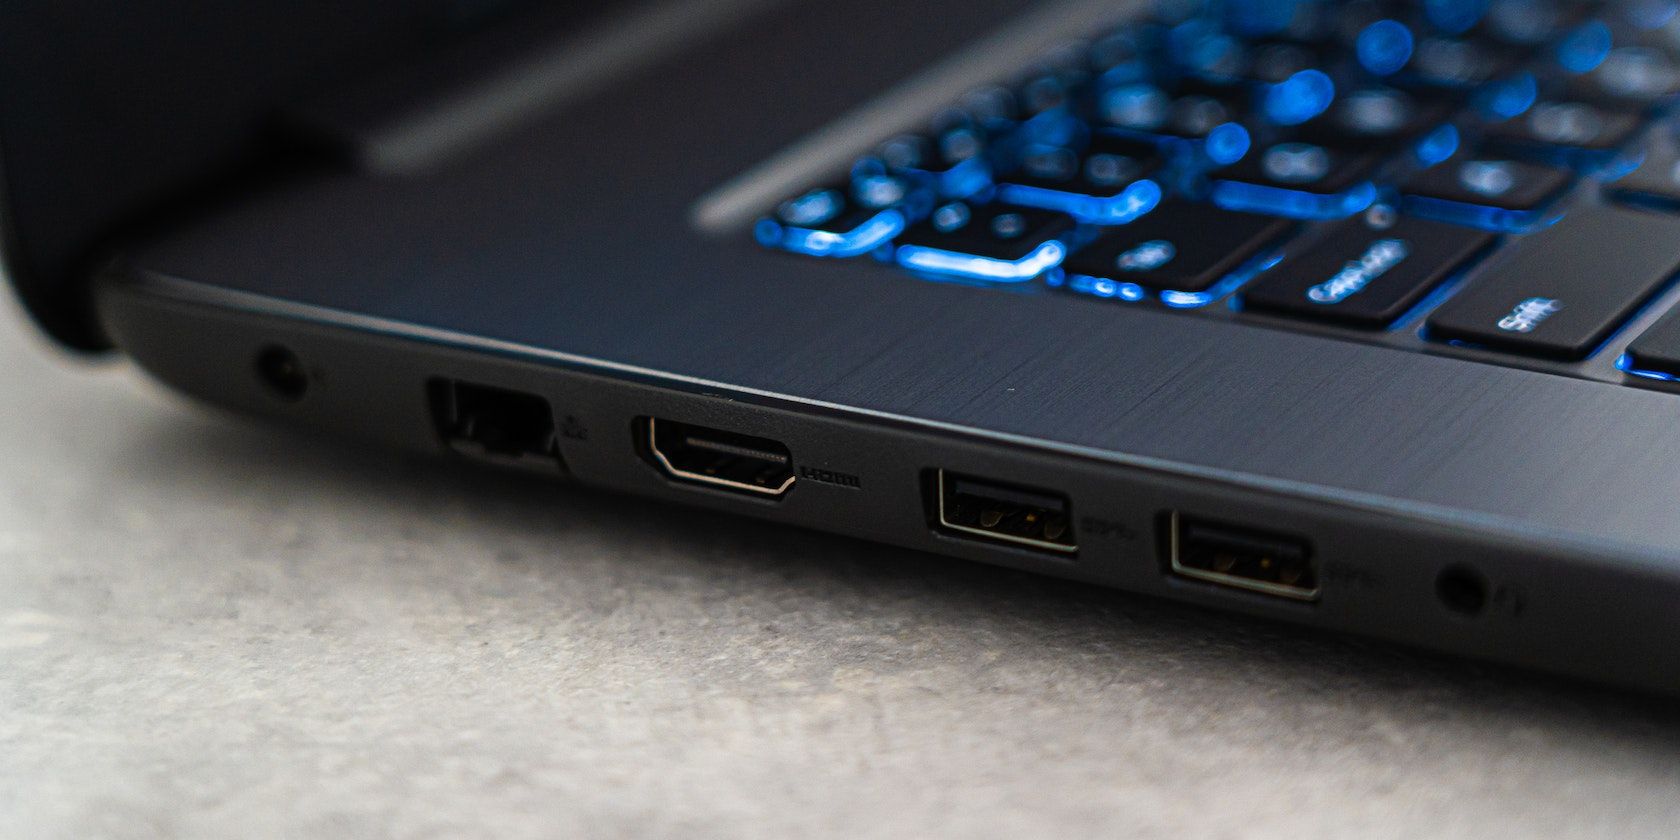 Close-up picture of a Laptop’s USB ports